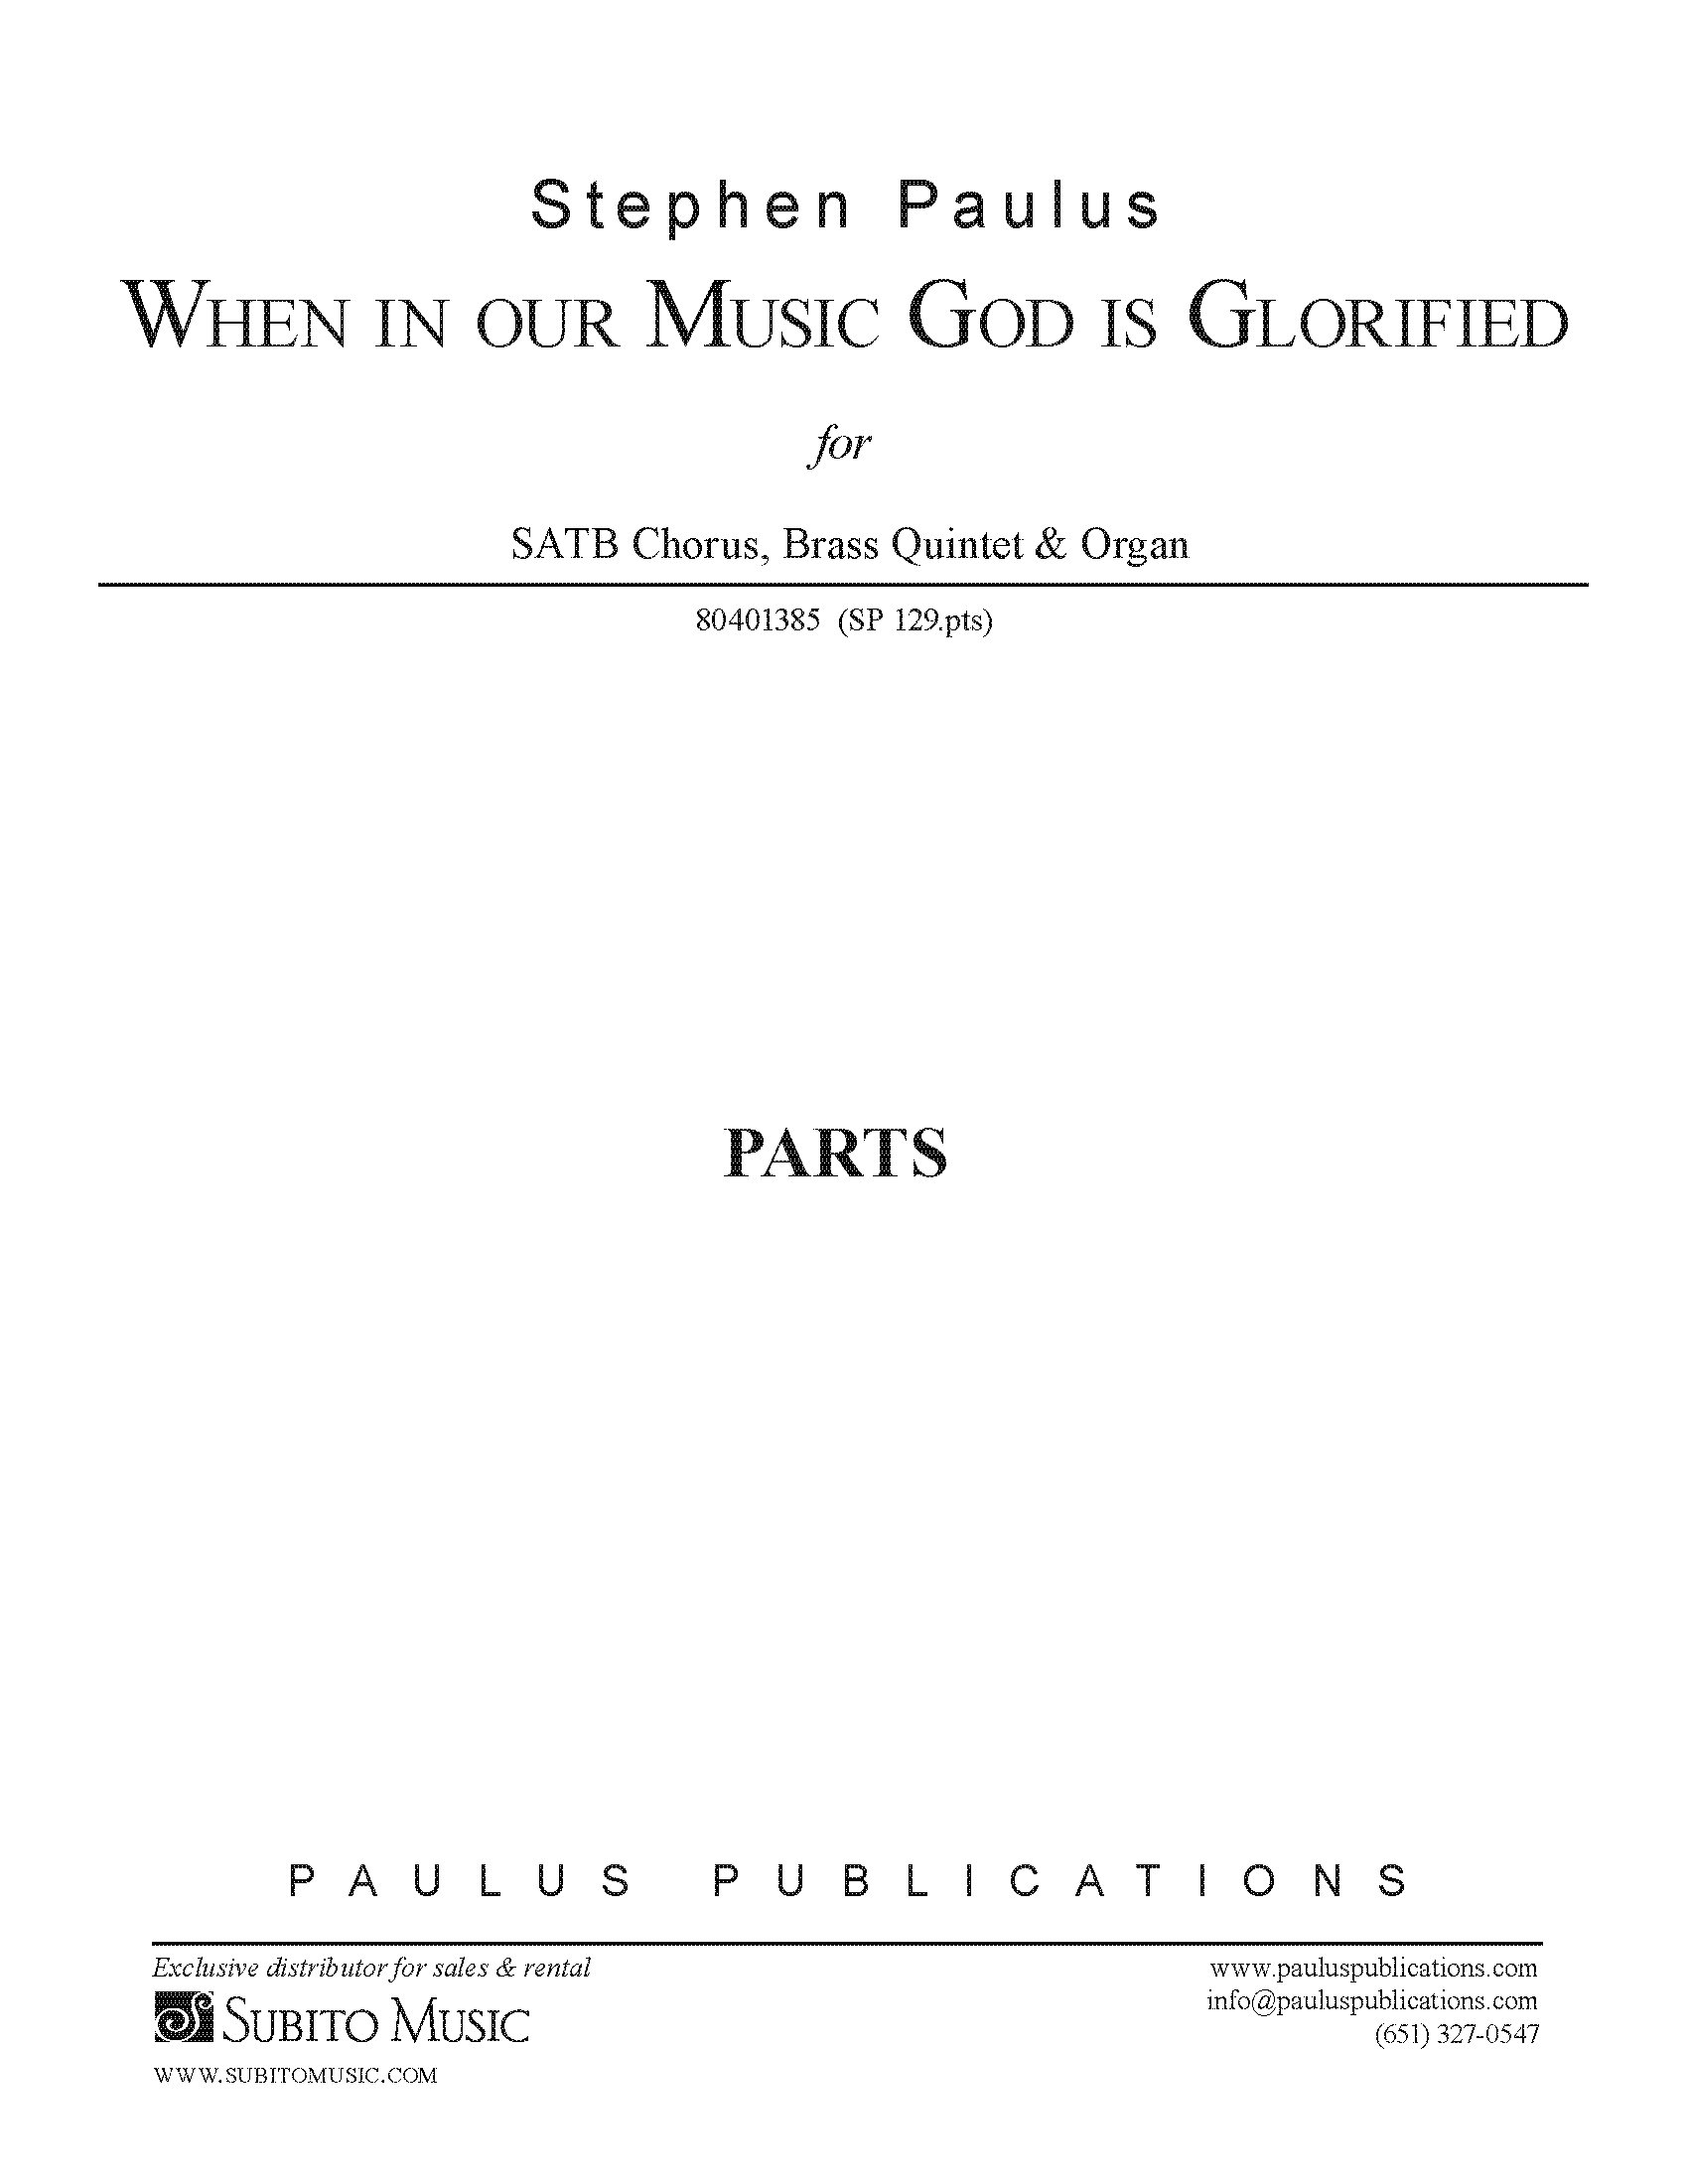 When in Our Music God is Glorified - PARTS for SATB Chorus, congregation, Brass Quintet & Organ